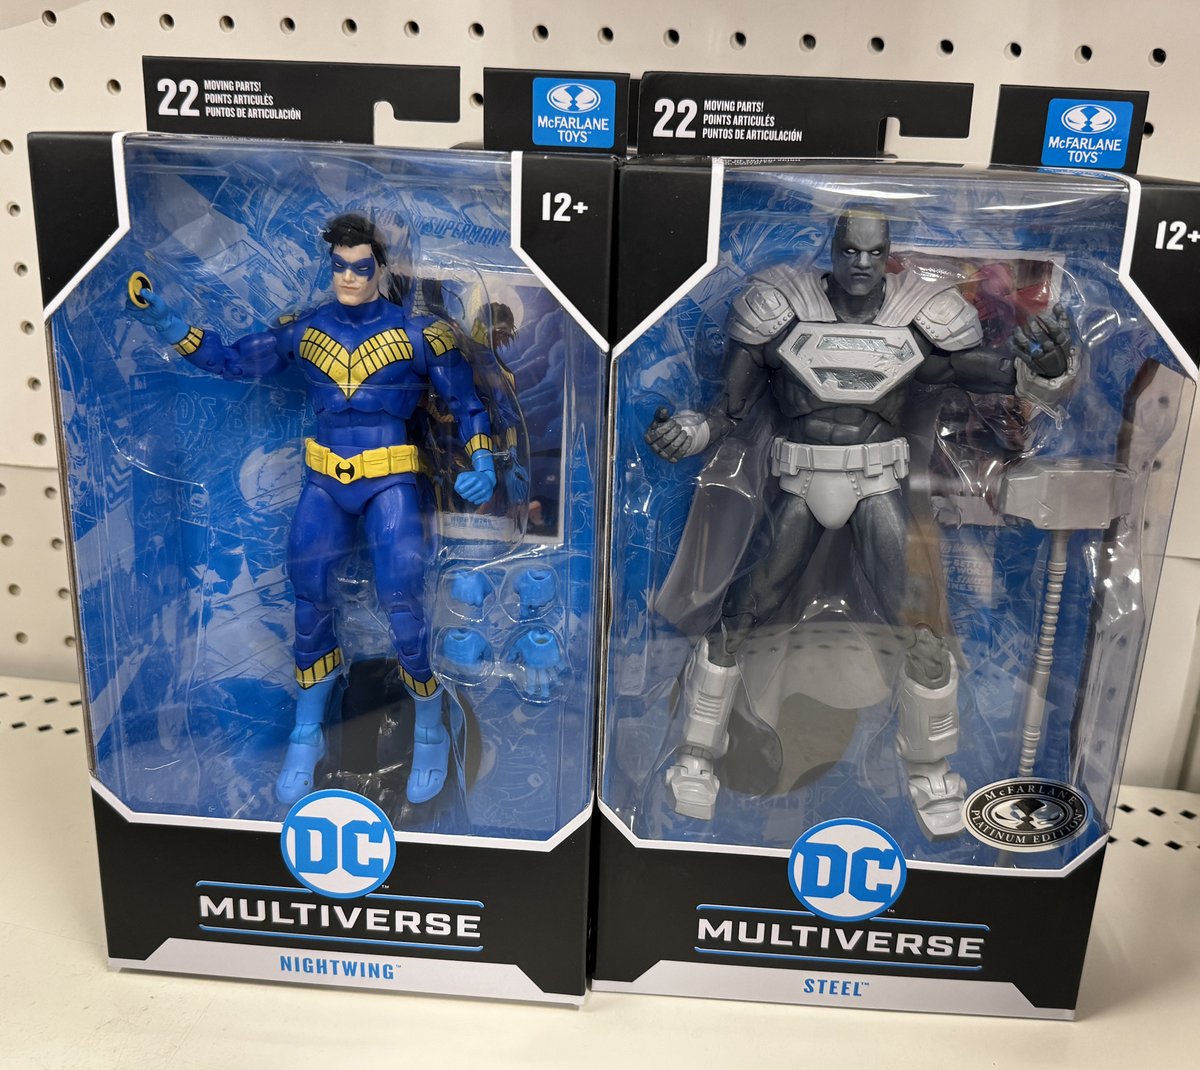 I saw these new McFarlane figures at Target recently. I hope we're getting a Discowing version soon. amzn.to/4a9wlLZ